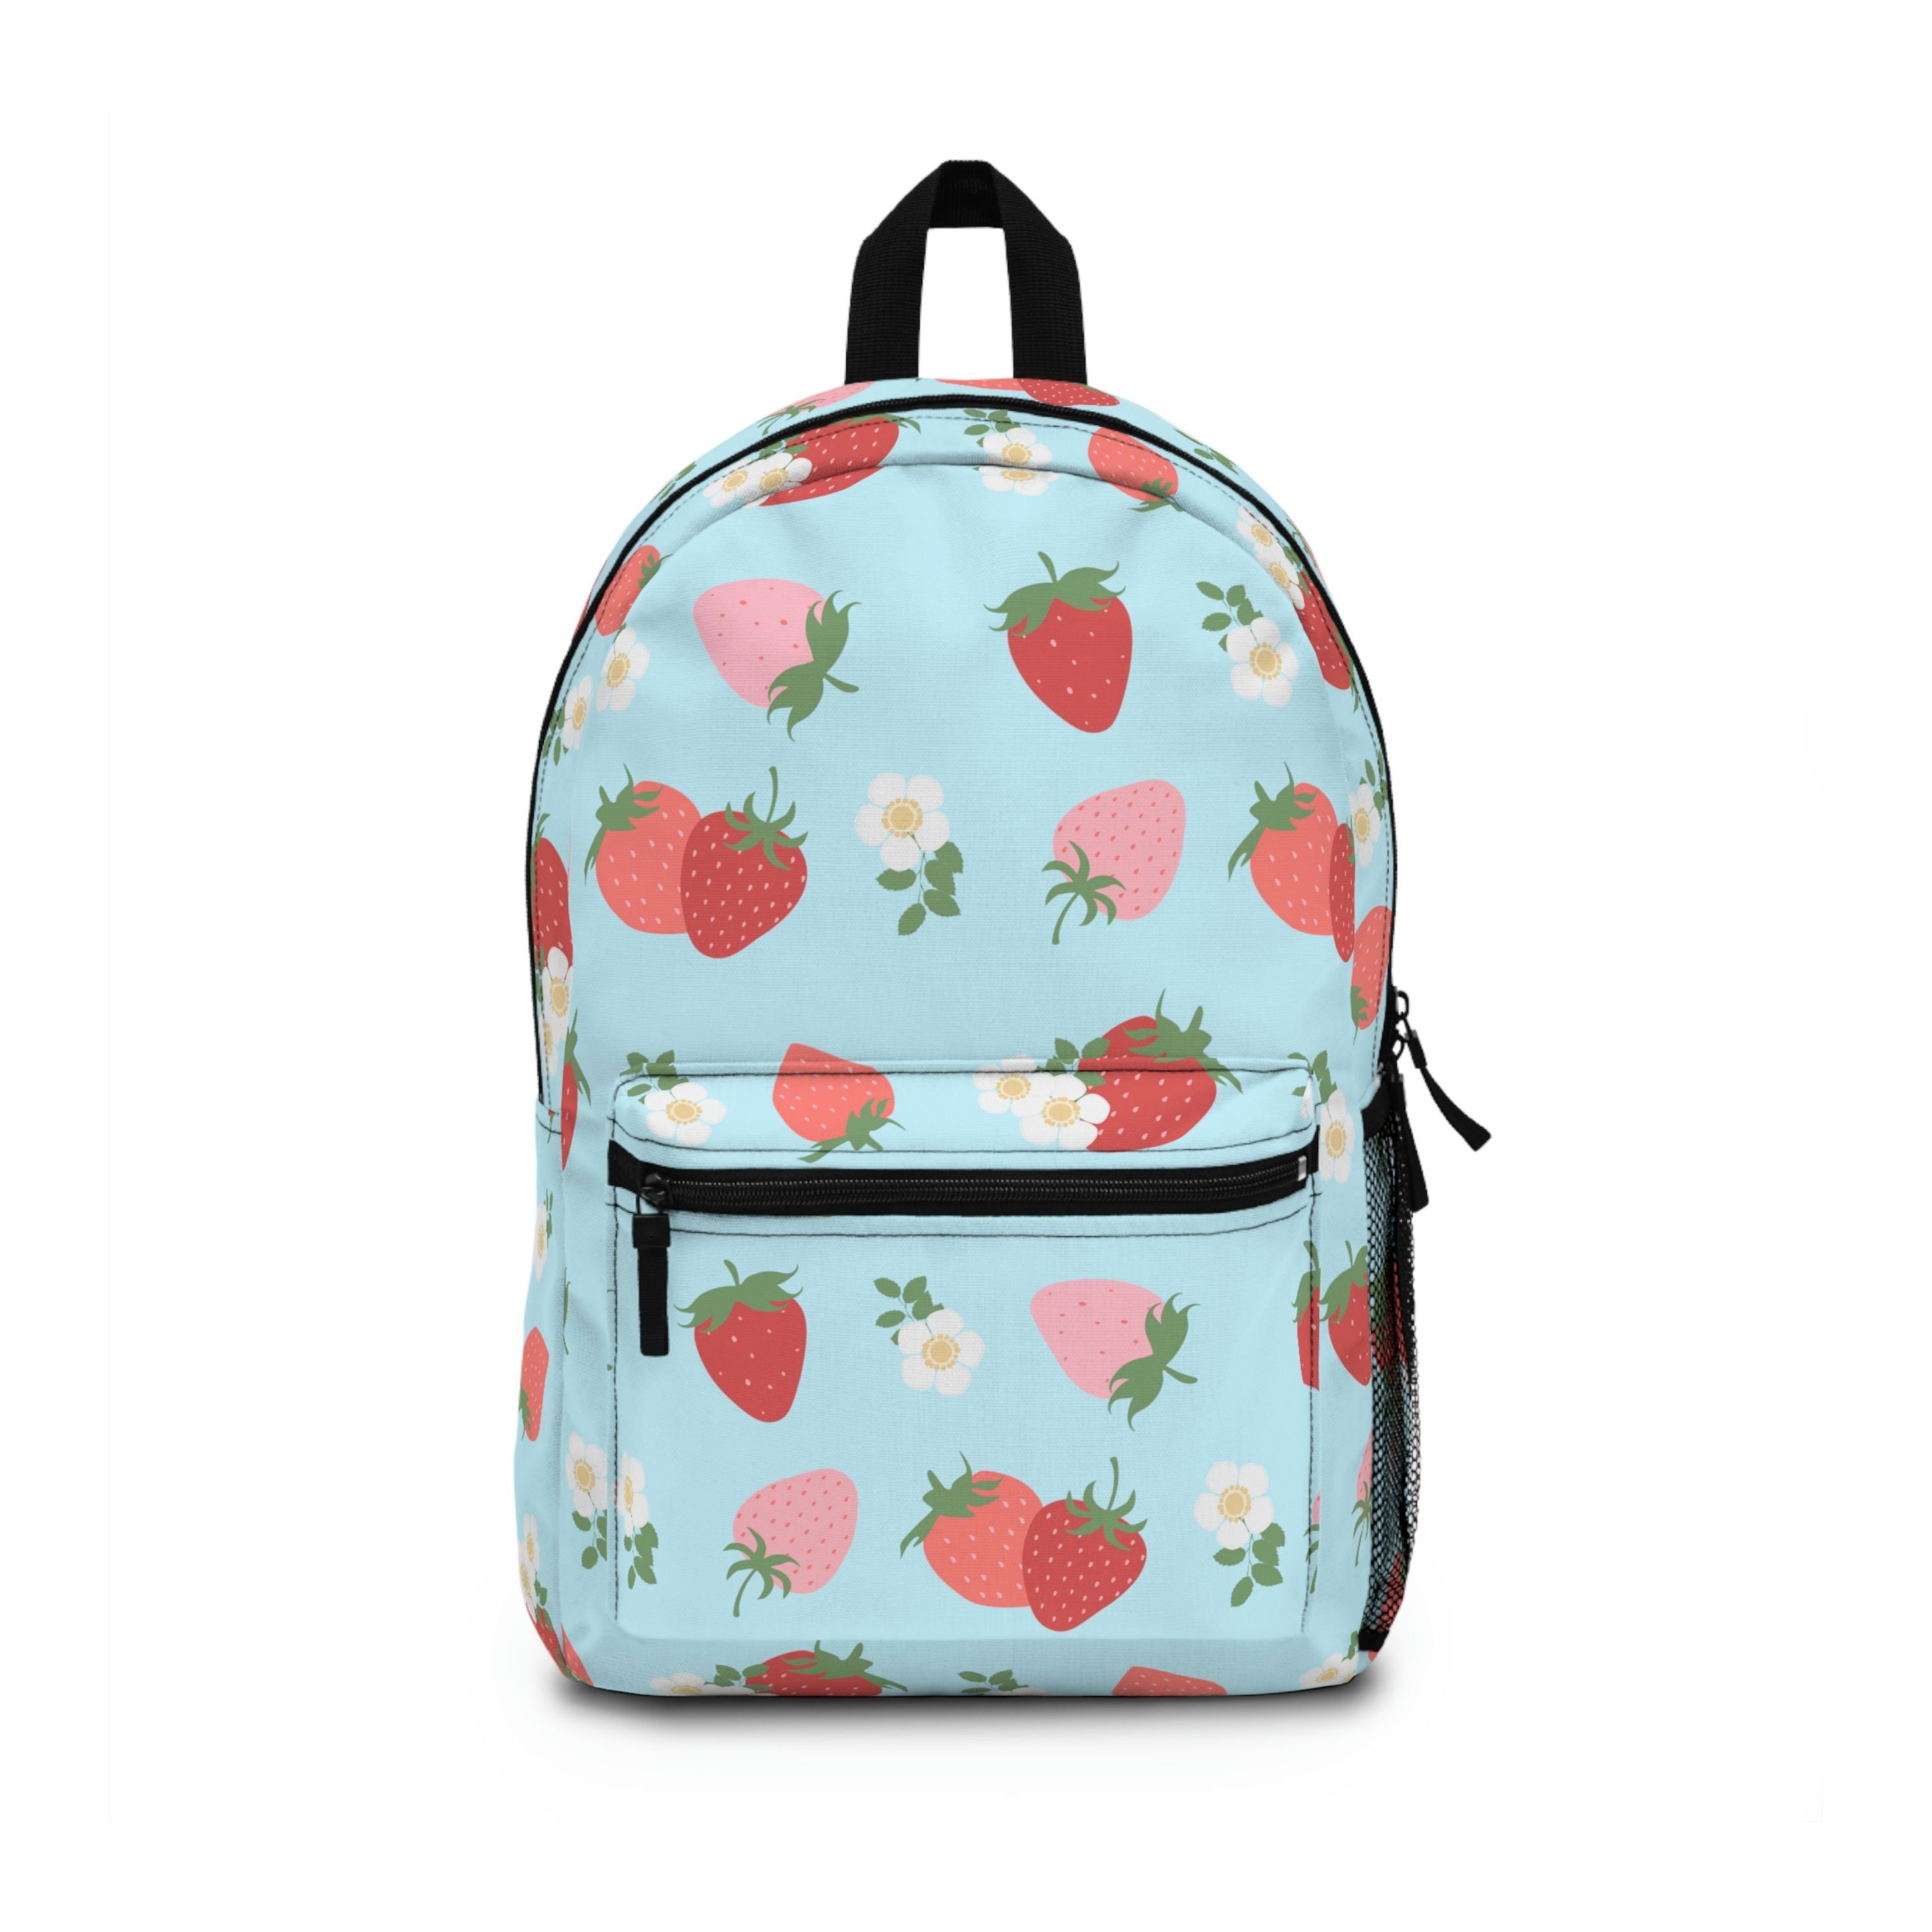  Upetstory Strawberry Backpack for School Girls in 4th Grade  School Bag 6-8 Kids School Backpack with Lunch Box Pencil Case Teens  BookBag